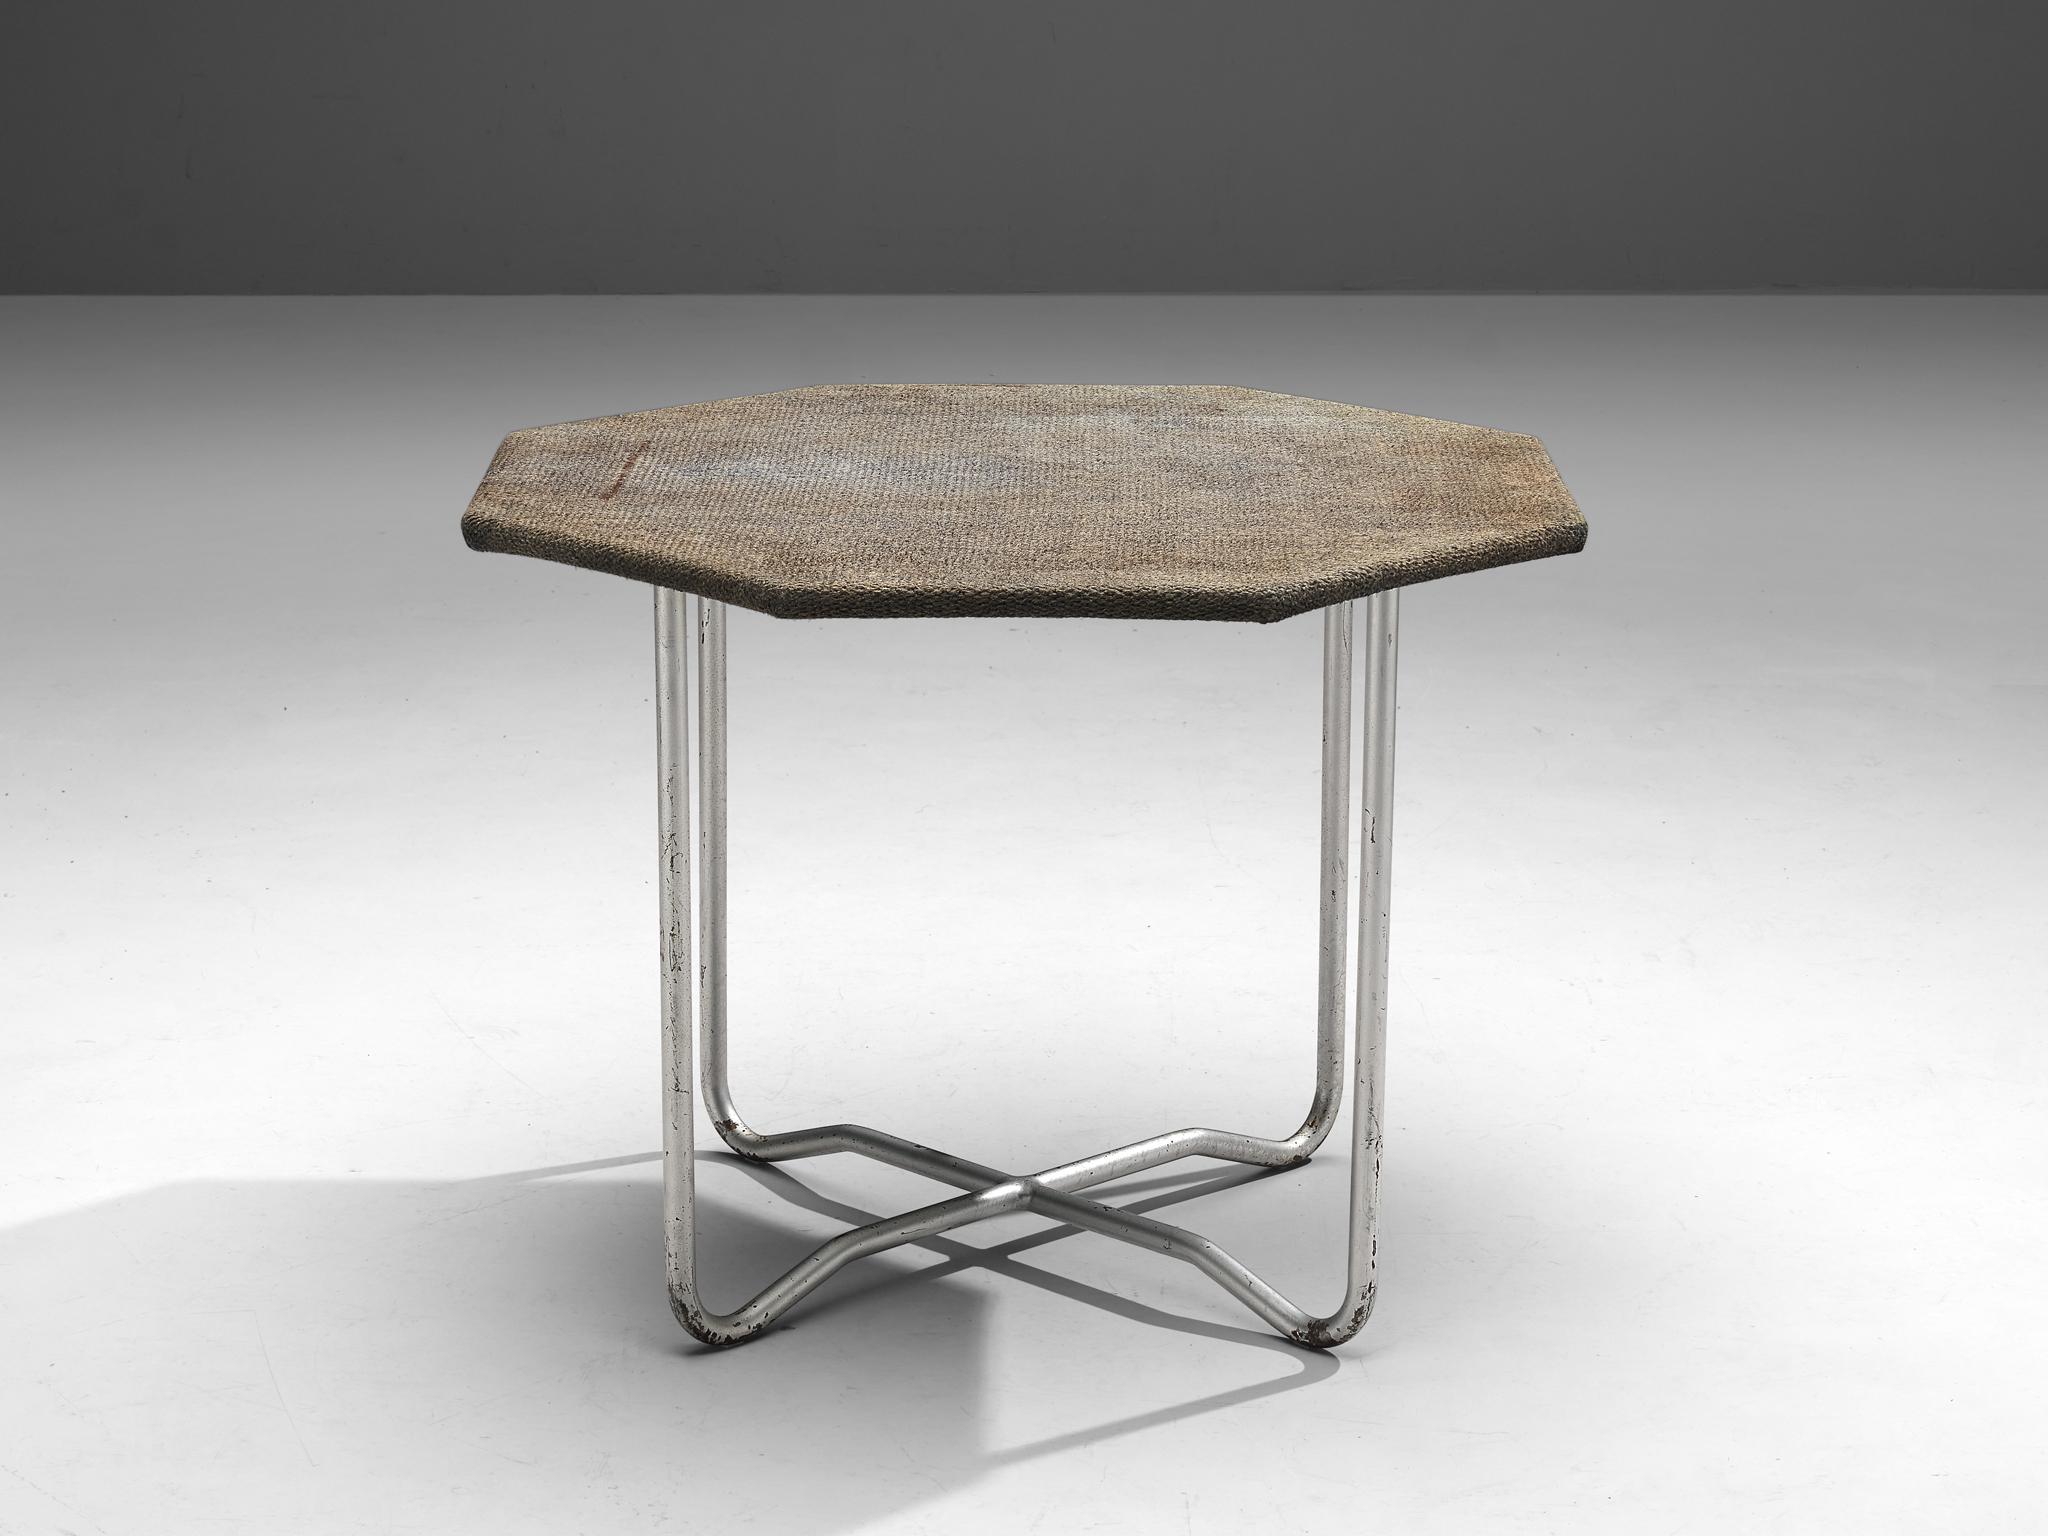 Bas van Pelt for E.M.S. Overschie, coffee table, metal, sisal, The Netherlands, 1930s.

This octagonal shaped coffee table is made by the Dutch interior and furniture designer Bas van Pelt (1900-1945), and is manufactured by E.M.S. Overschie. The